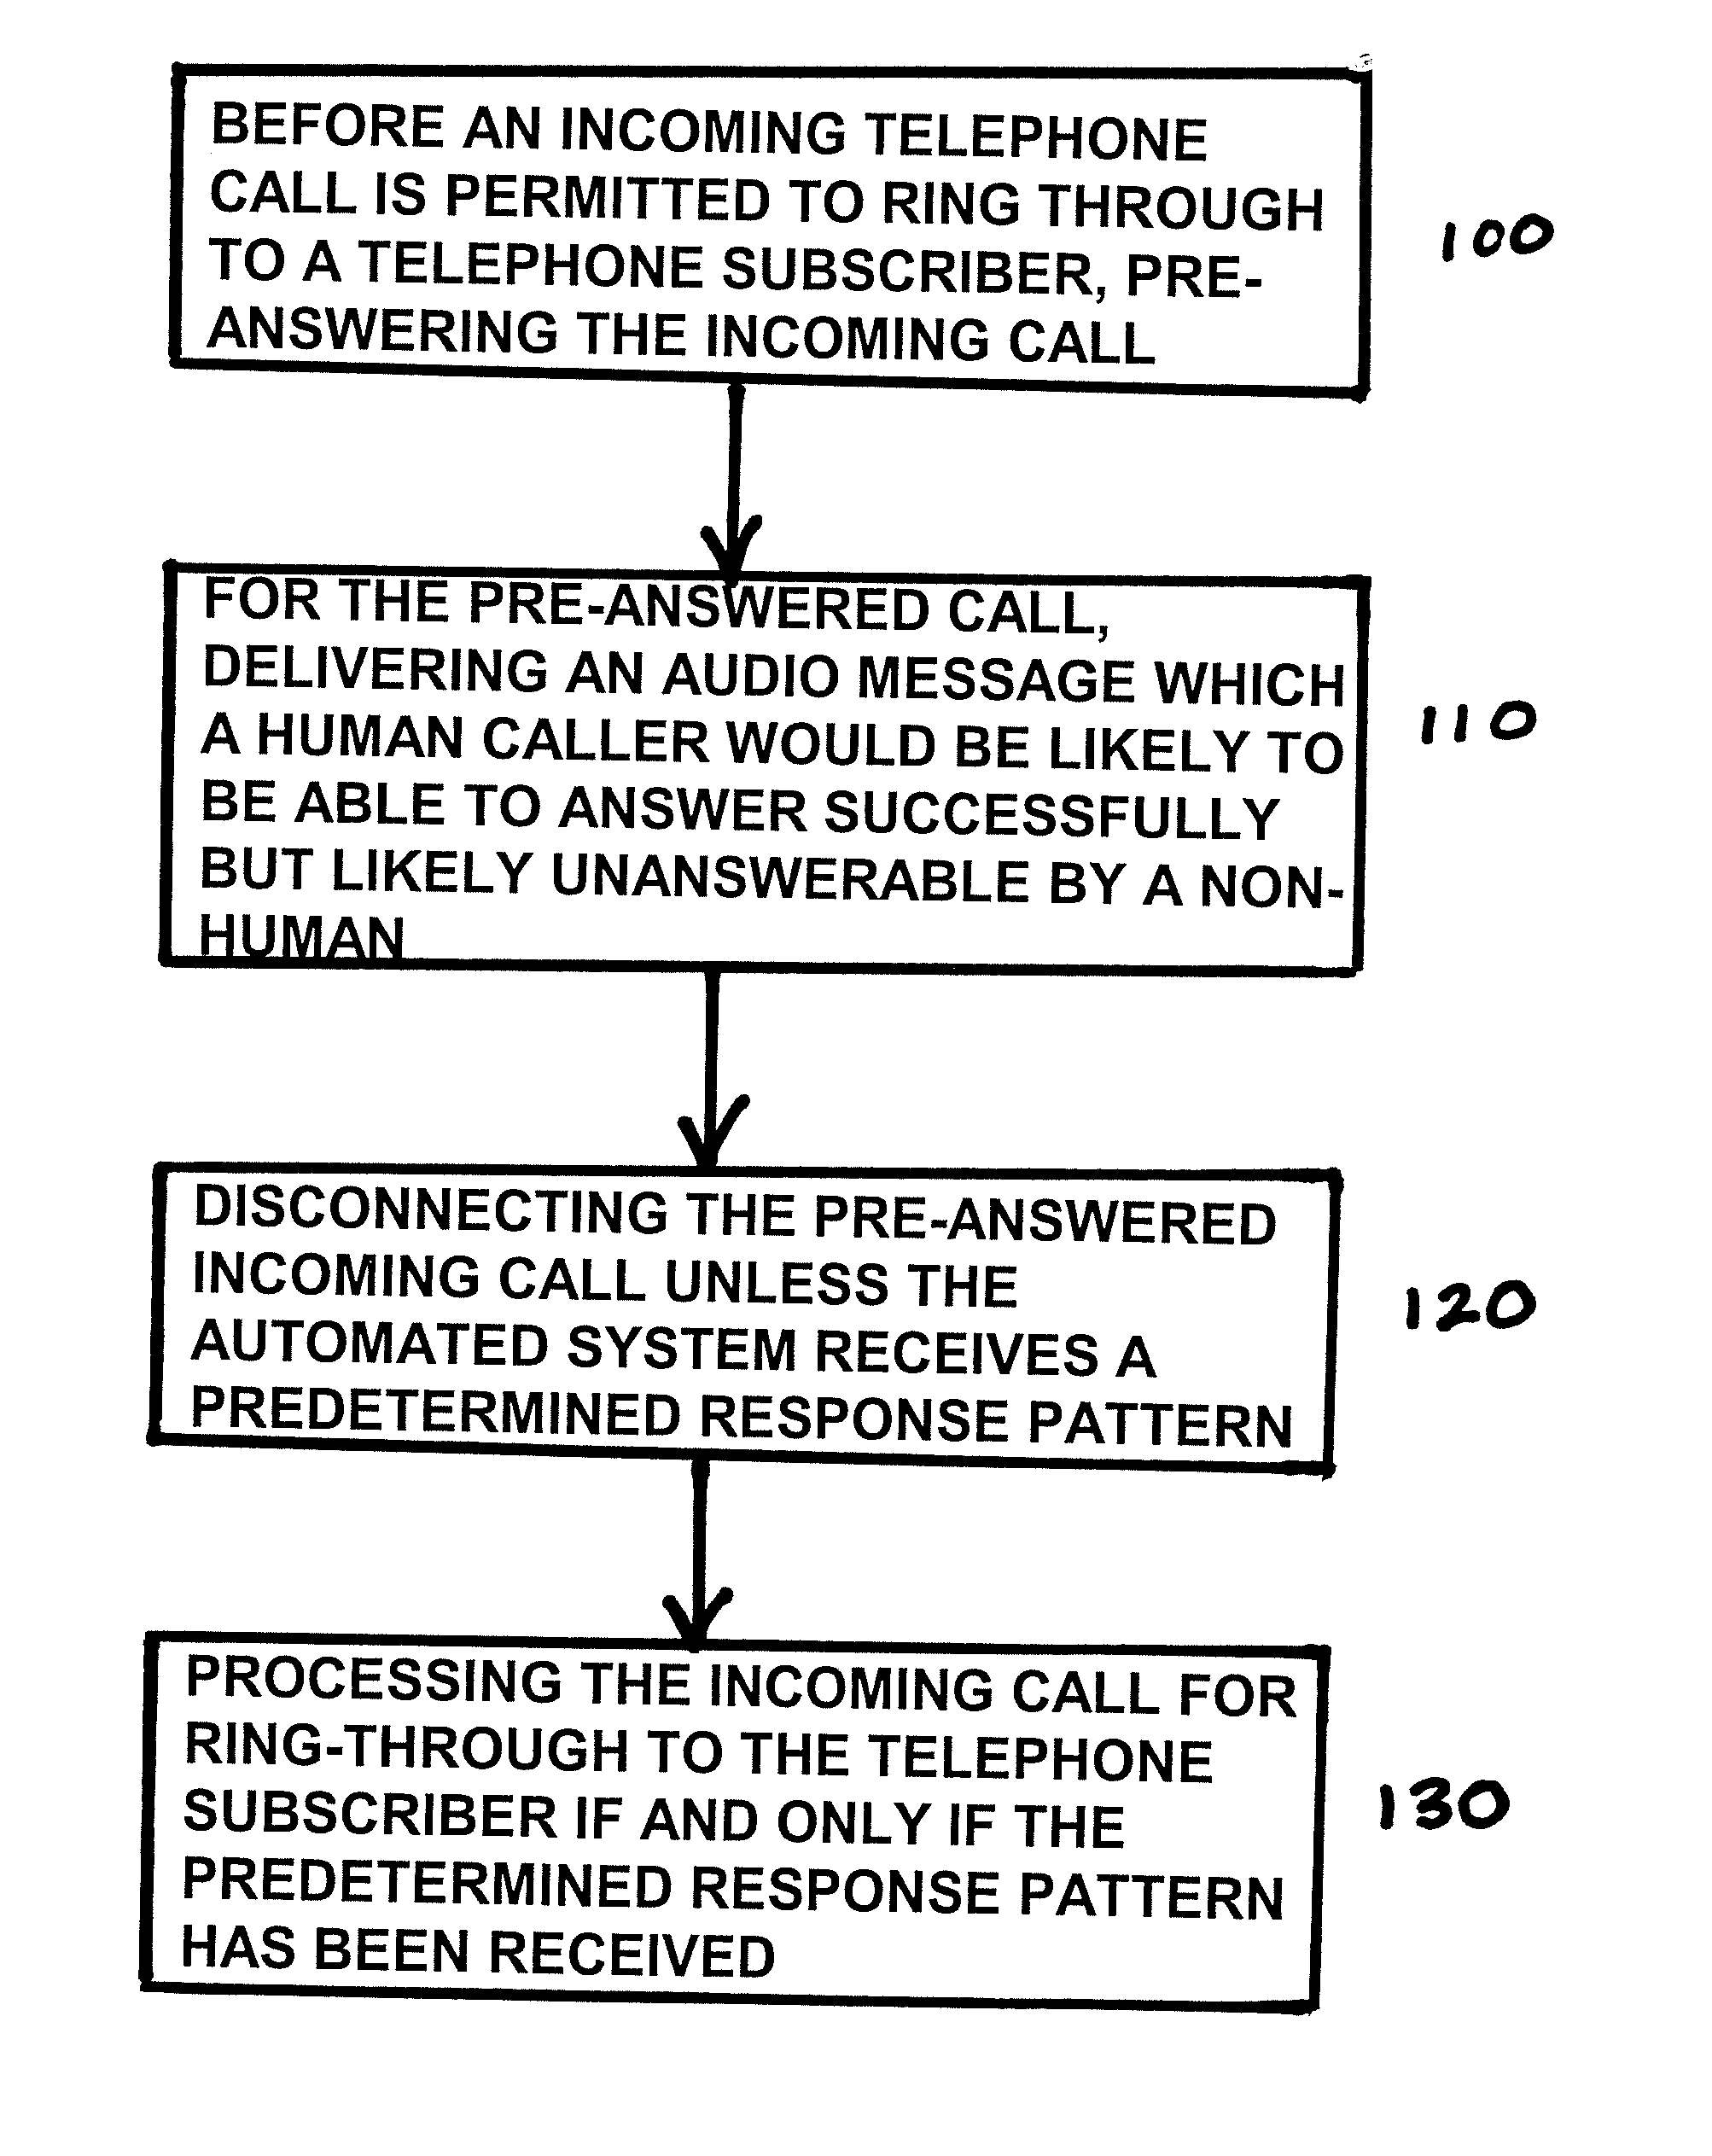 Stopping robocalls